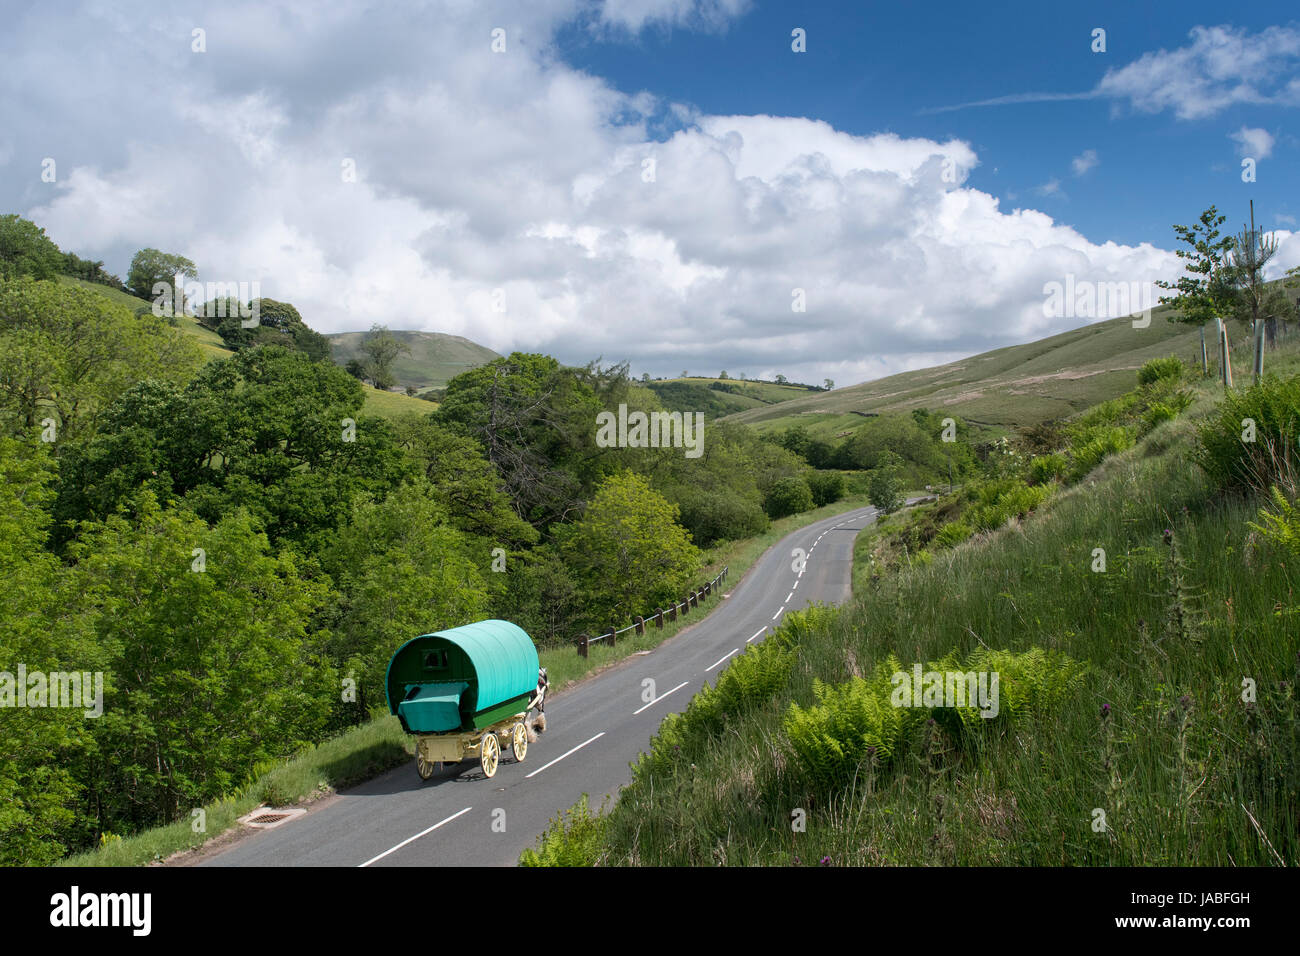 Gypsy travellers with horse drawn caravan on the A683 near Cautley, Cumbria, UK. Stock Photo